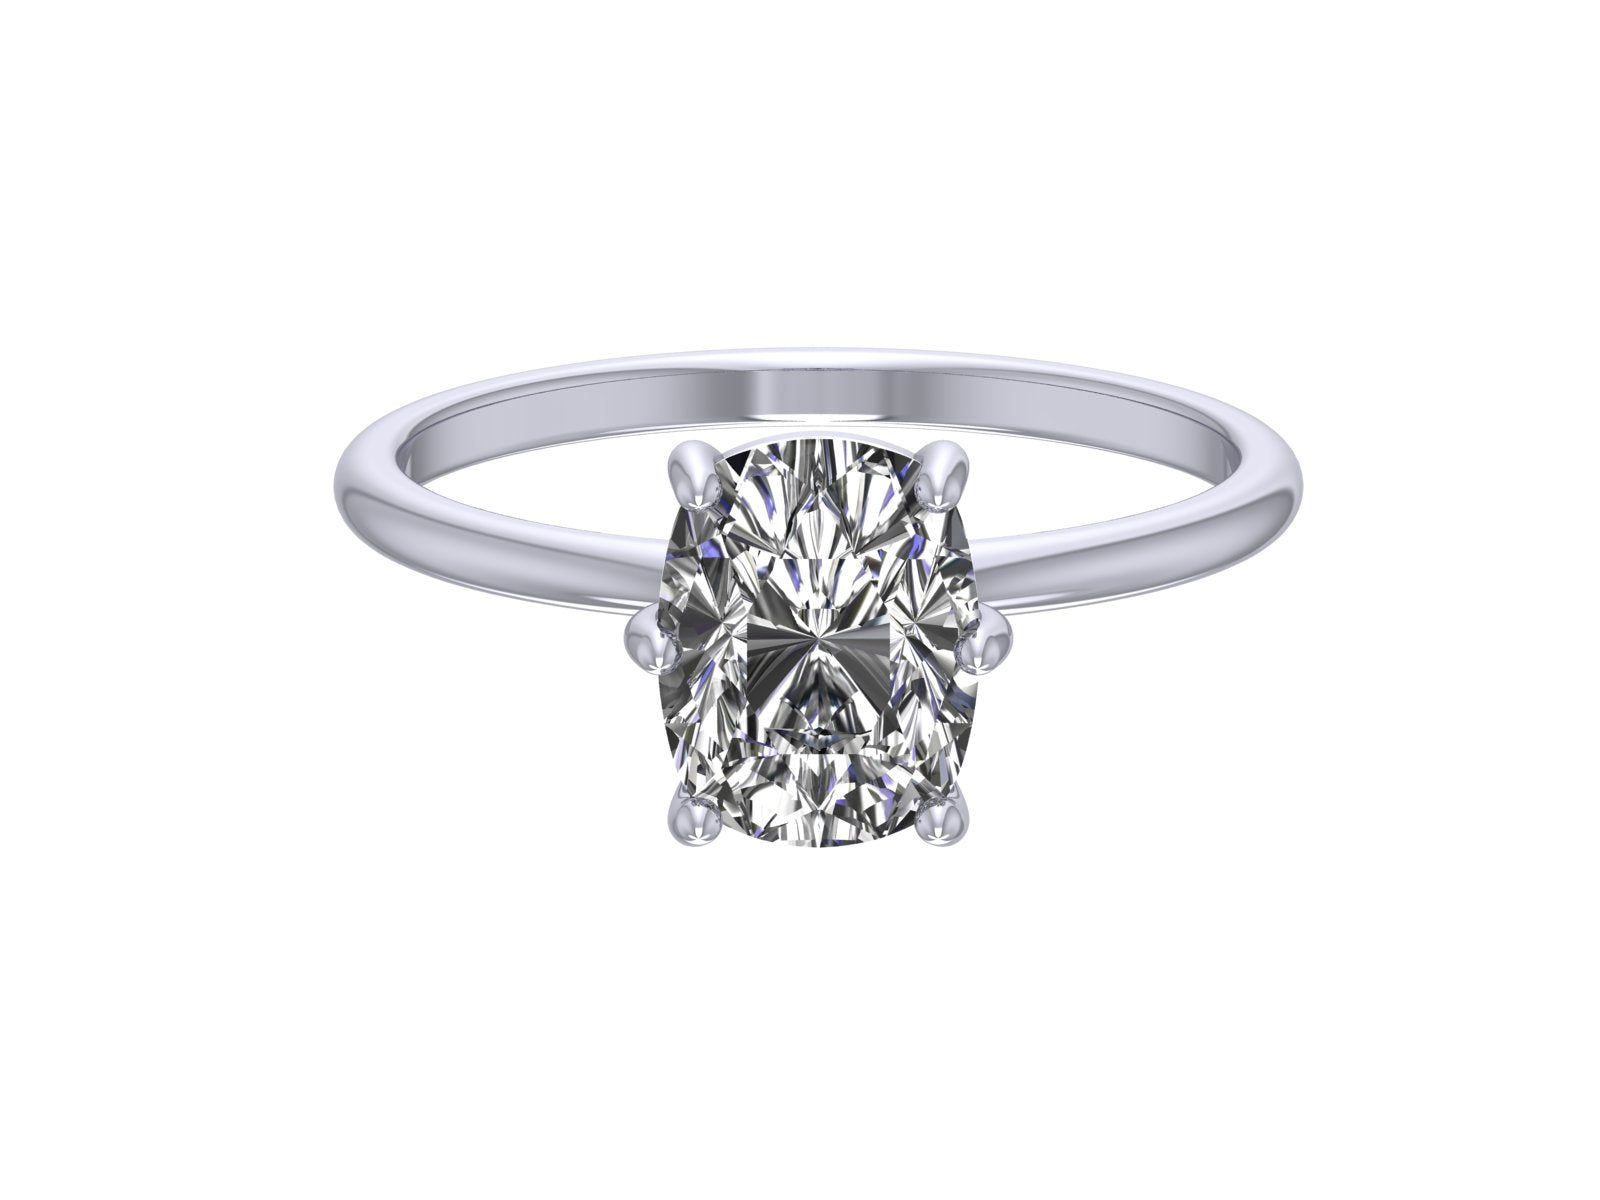 2.55ct Forever One Cushion Cut Engagement Ring